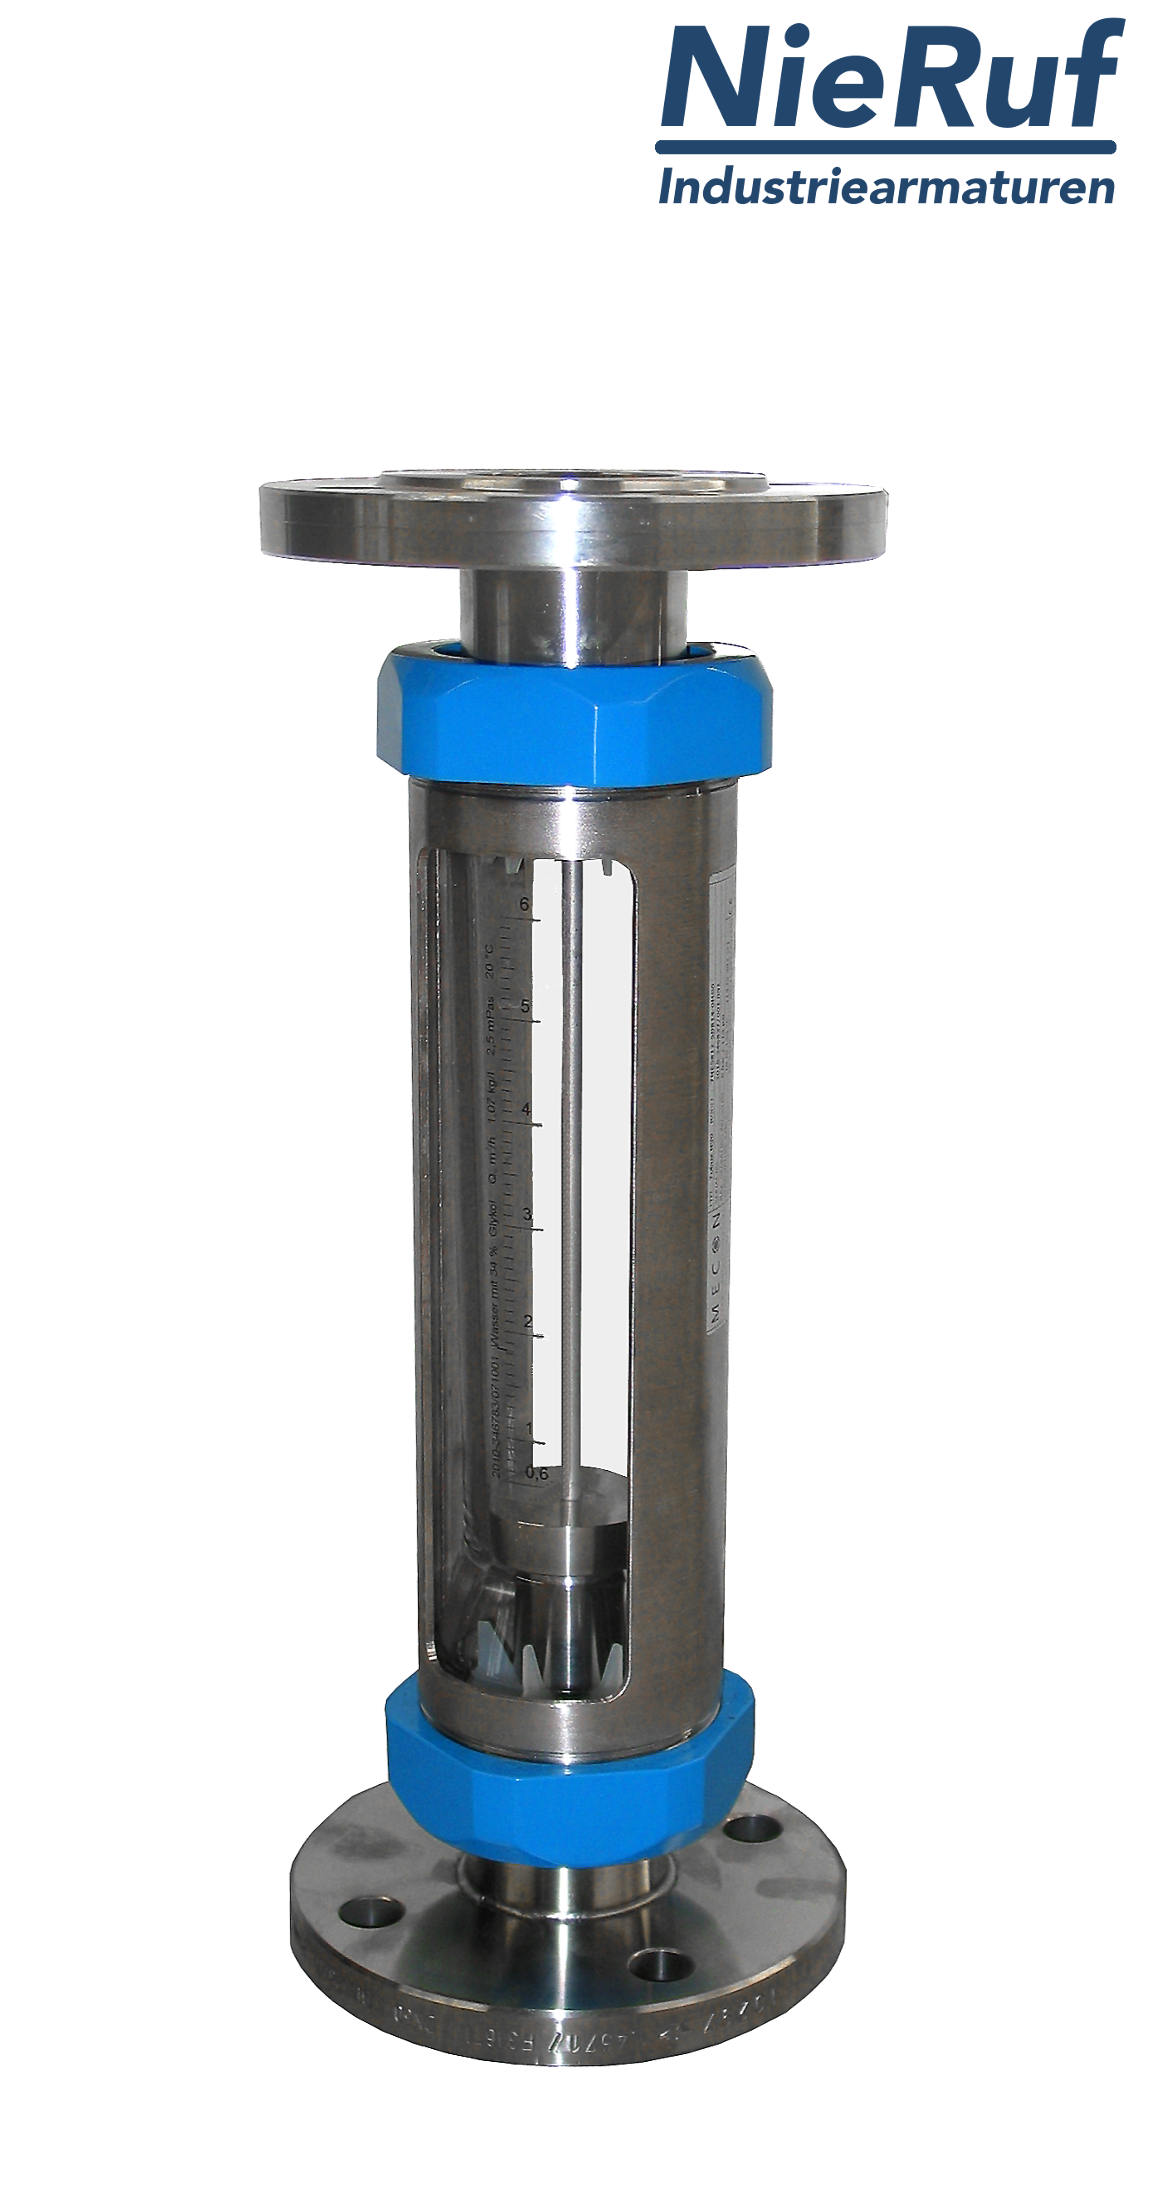 Variable area flowmeter stainless steel + borosilicate flange DN10 20.0 - 200.0 l/h water FKM